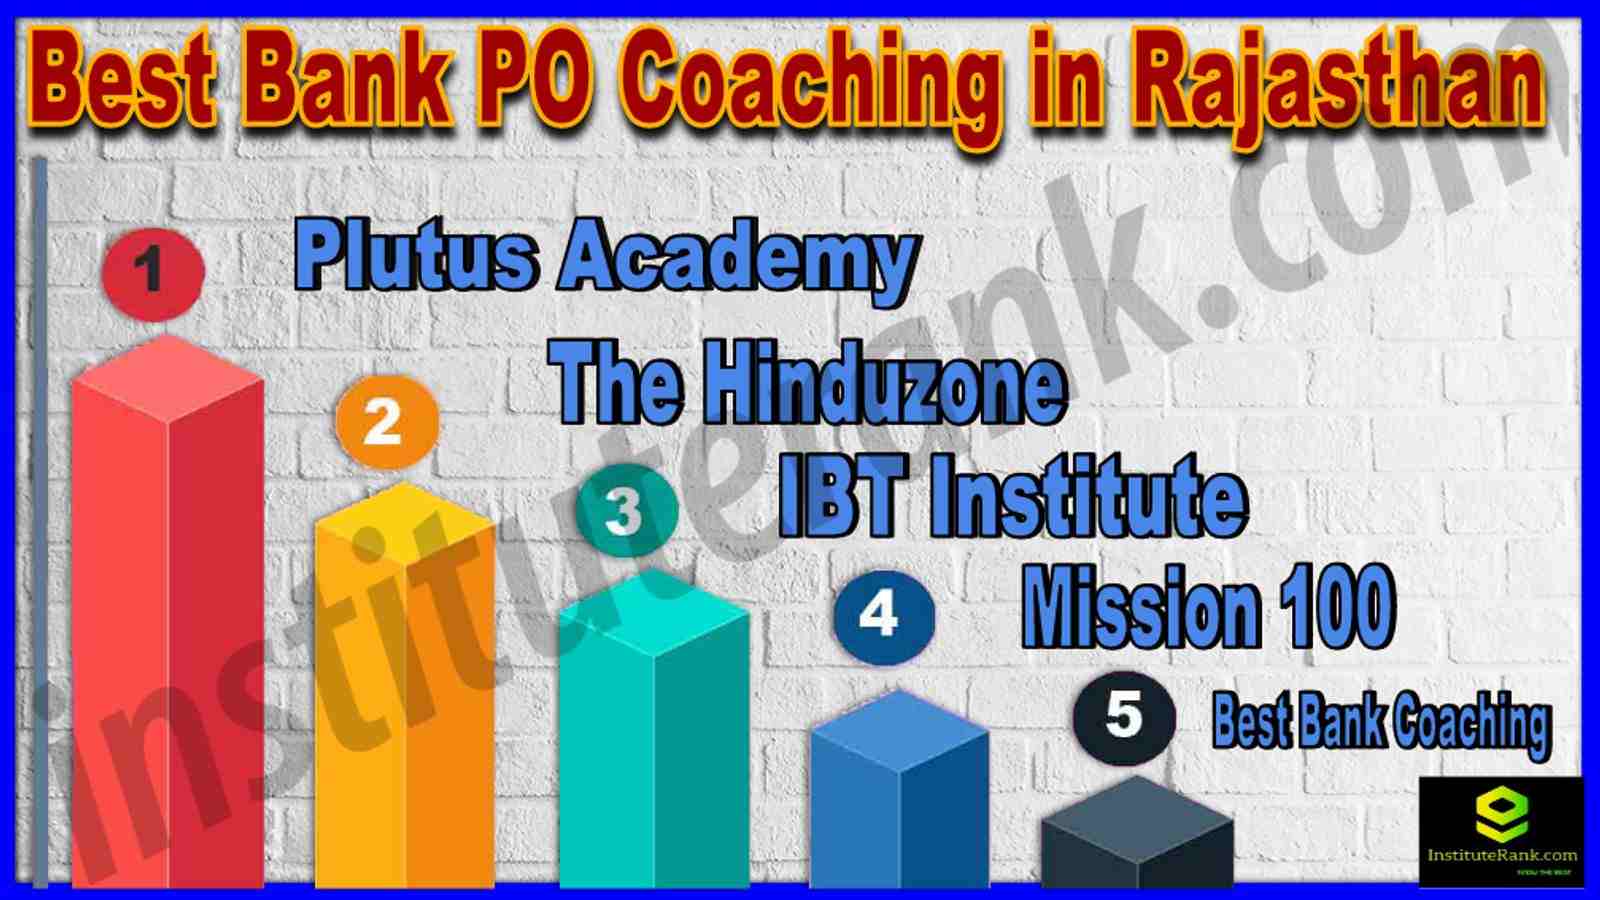 Best Bank PO Coaching in Rajasthan